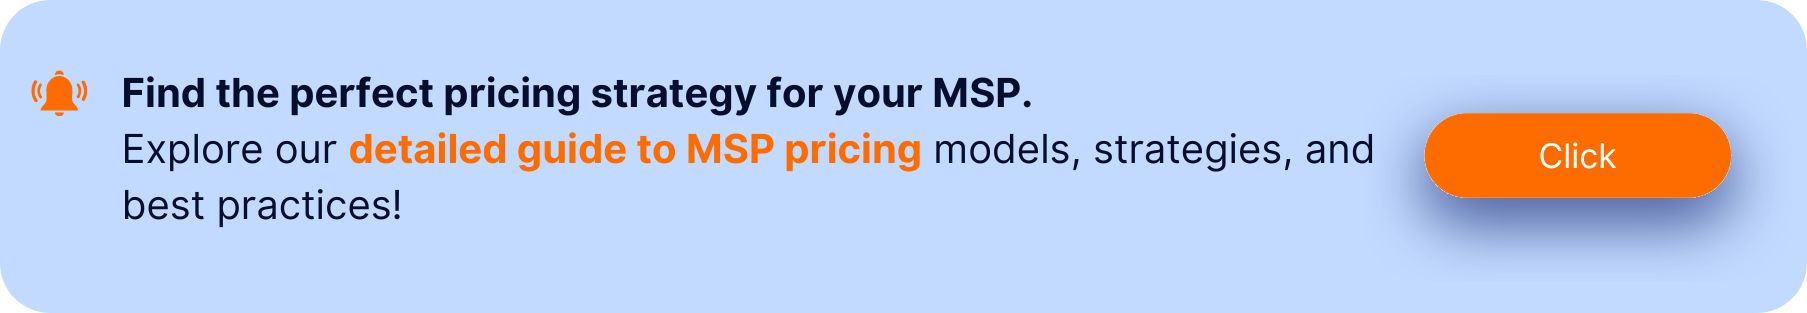  Banner with a notification icon and the text: "Find the perfect pricing strategy for your MSP. Explore our detailed guide to MSP pricing models, strategies, and best practices!" A prominent orange "Click" button is on the right side.